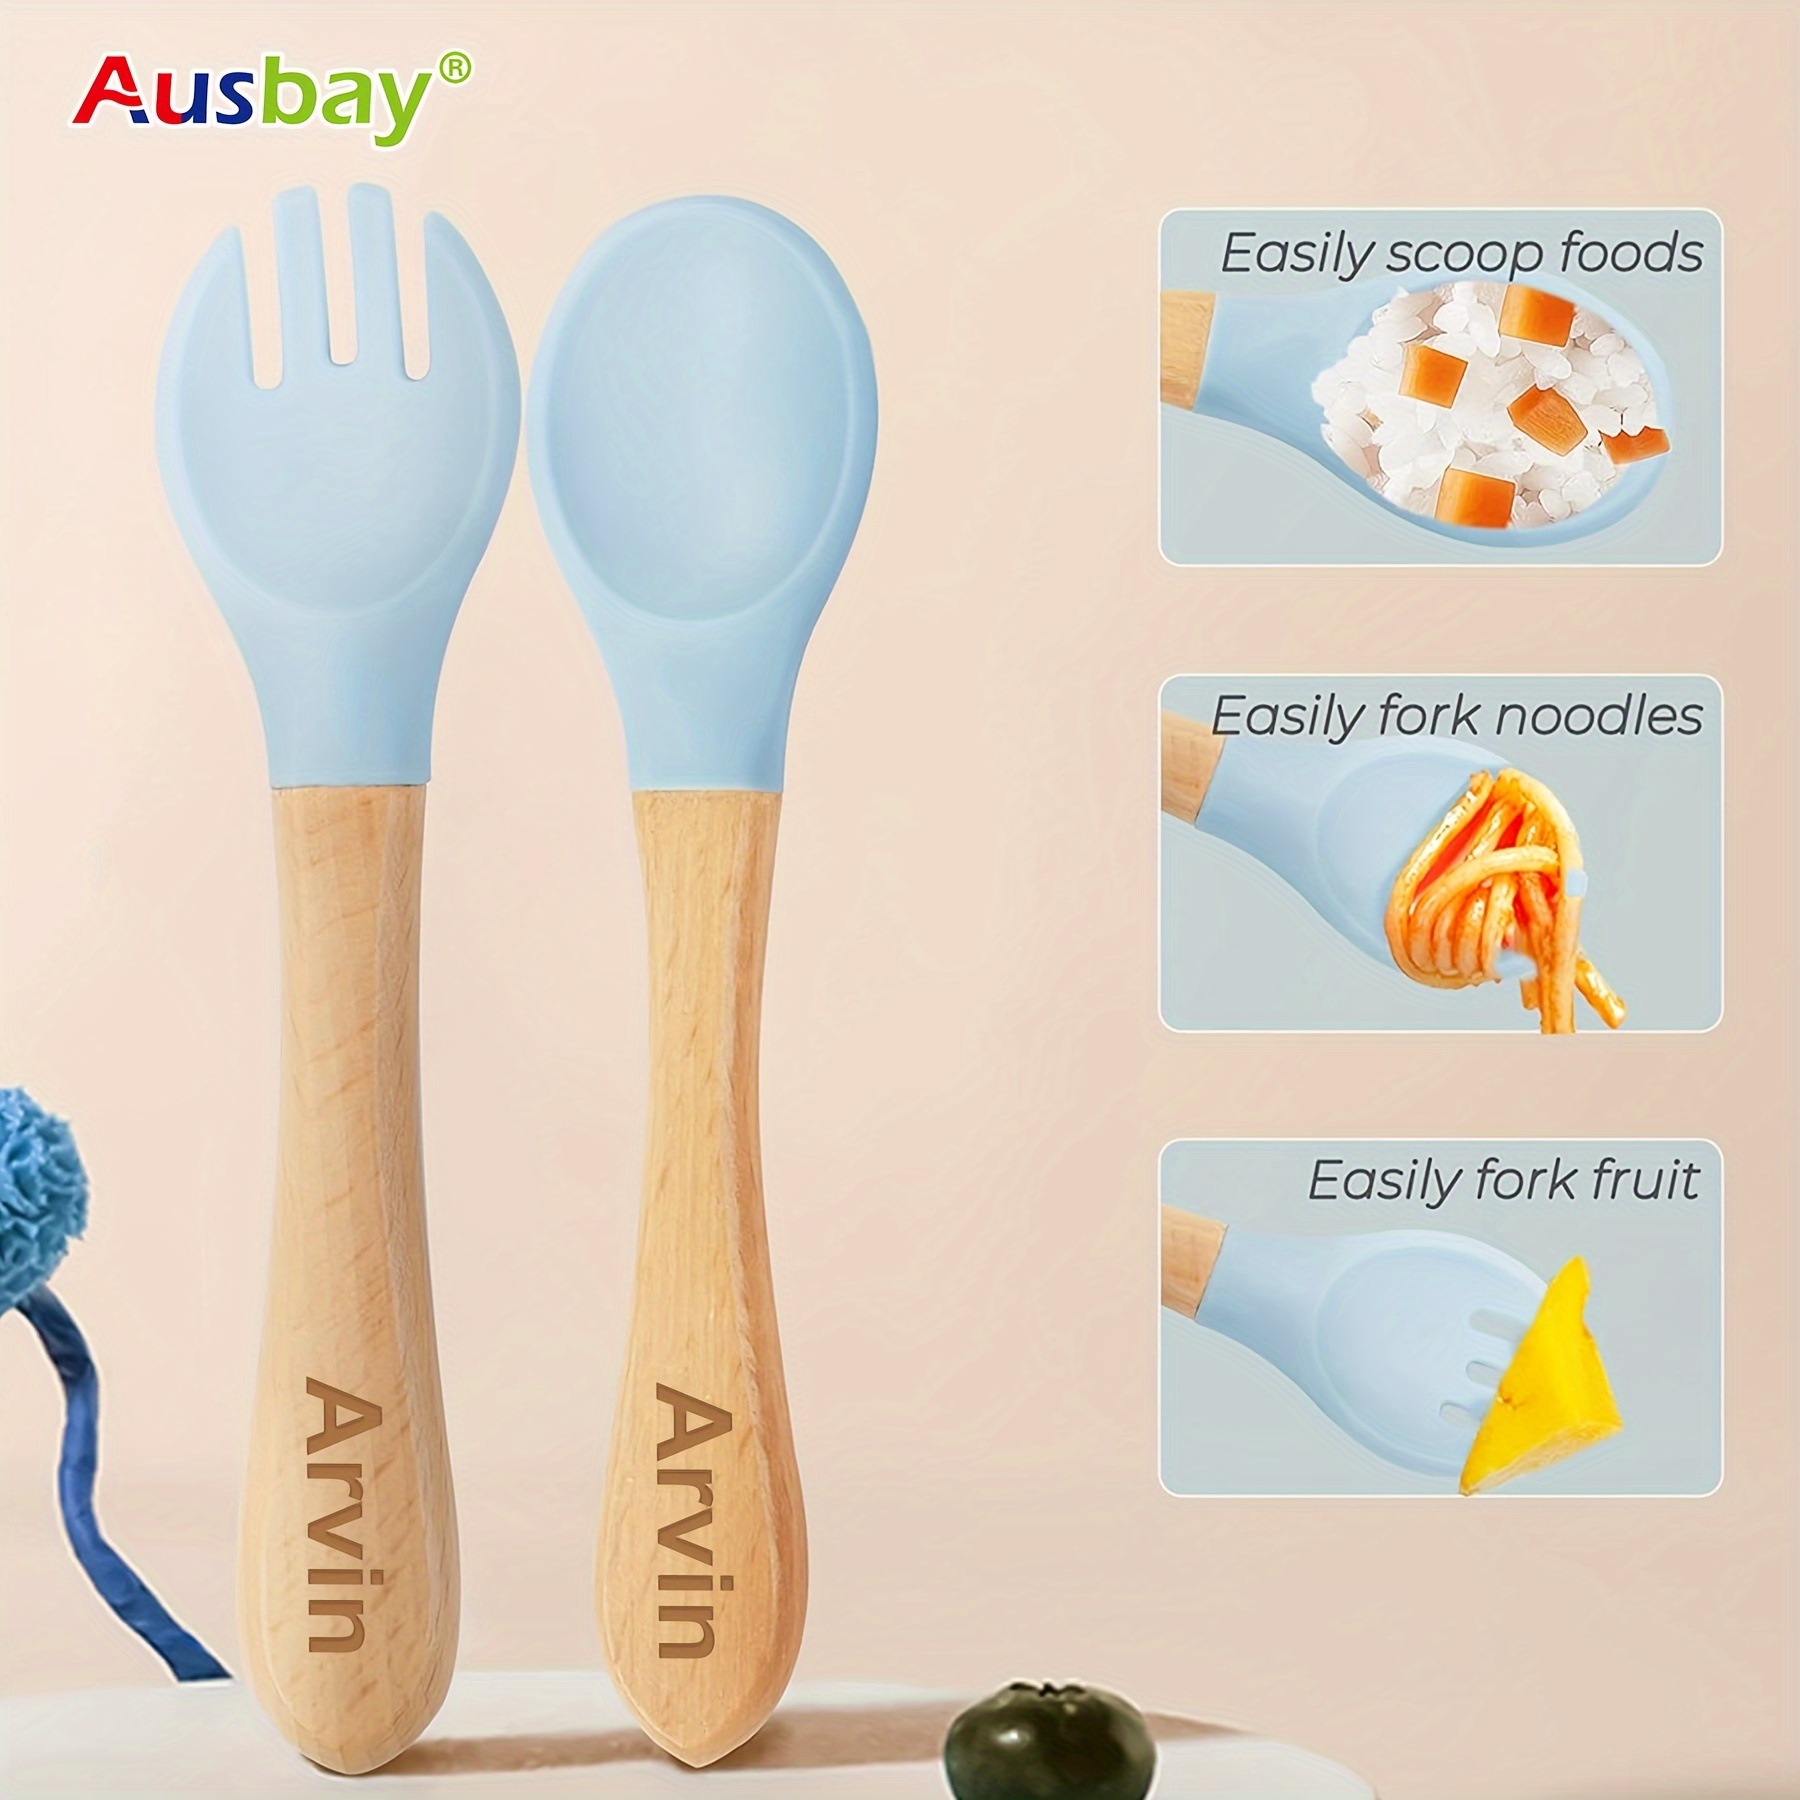 

2pcs, Customized Training Spoon Fork Cutlery Set With Name, Durable And Safe Fork, Food Grade Silicone Spoon Fork With Personalized Name Handles